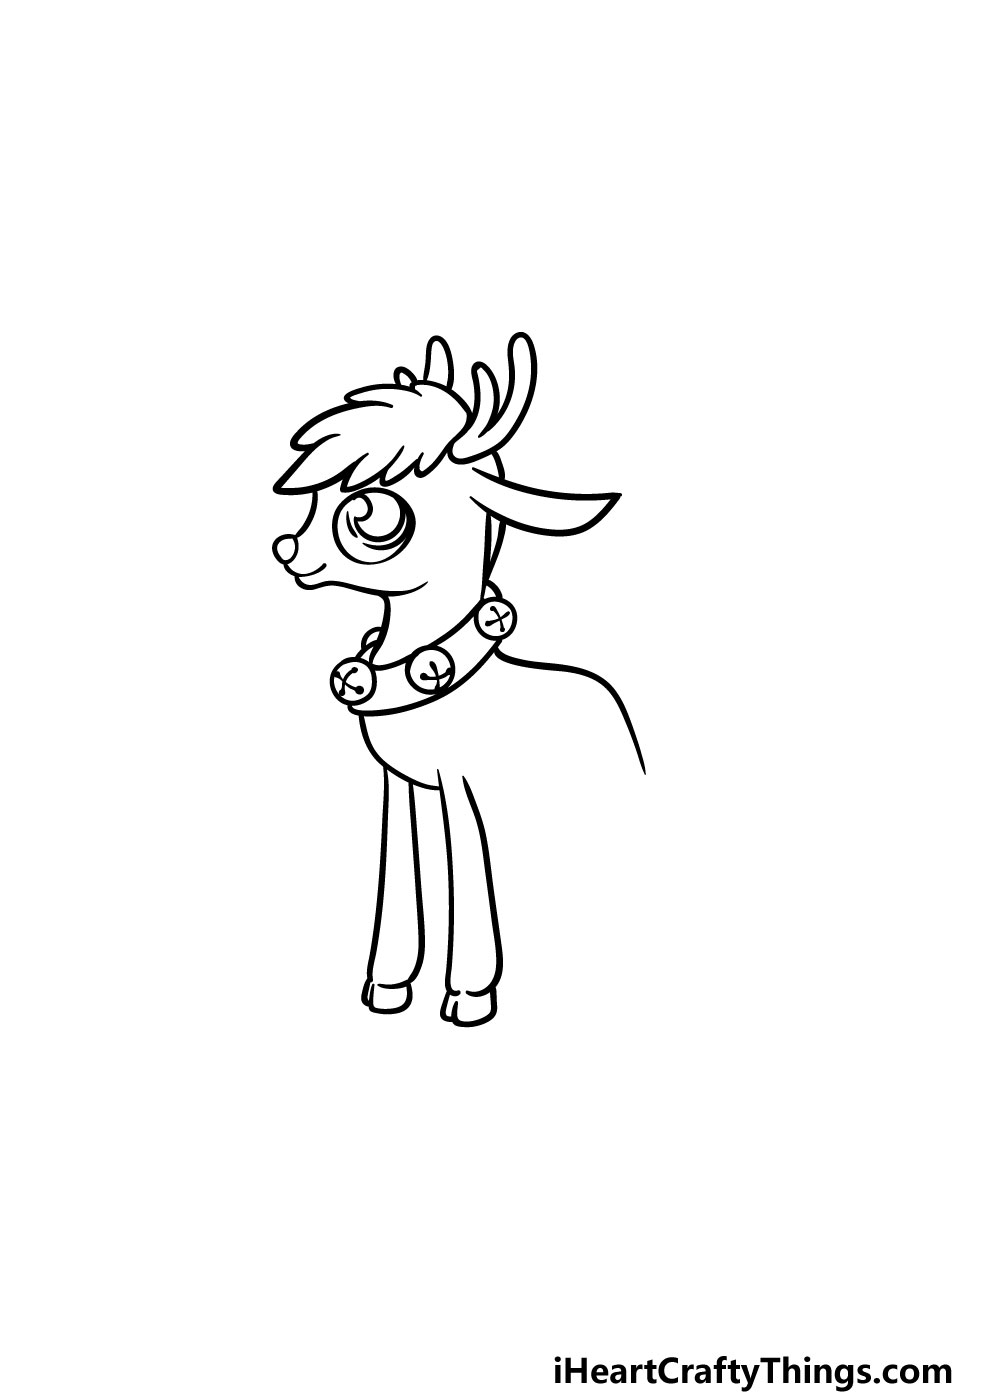 drawing Rudolph step 3